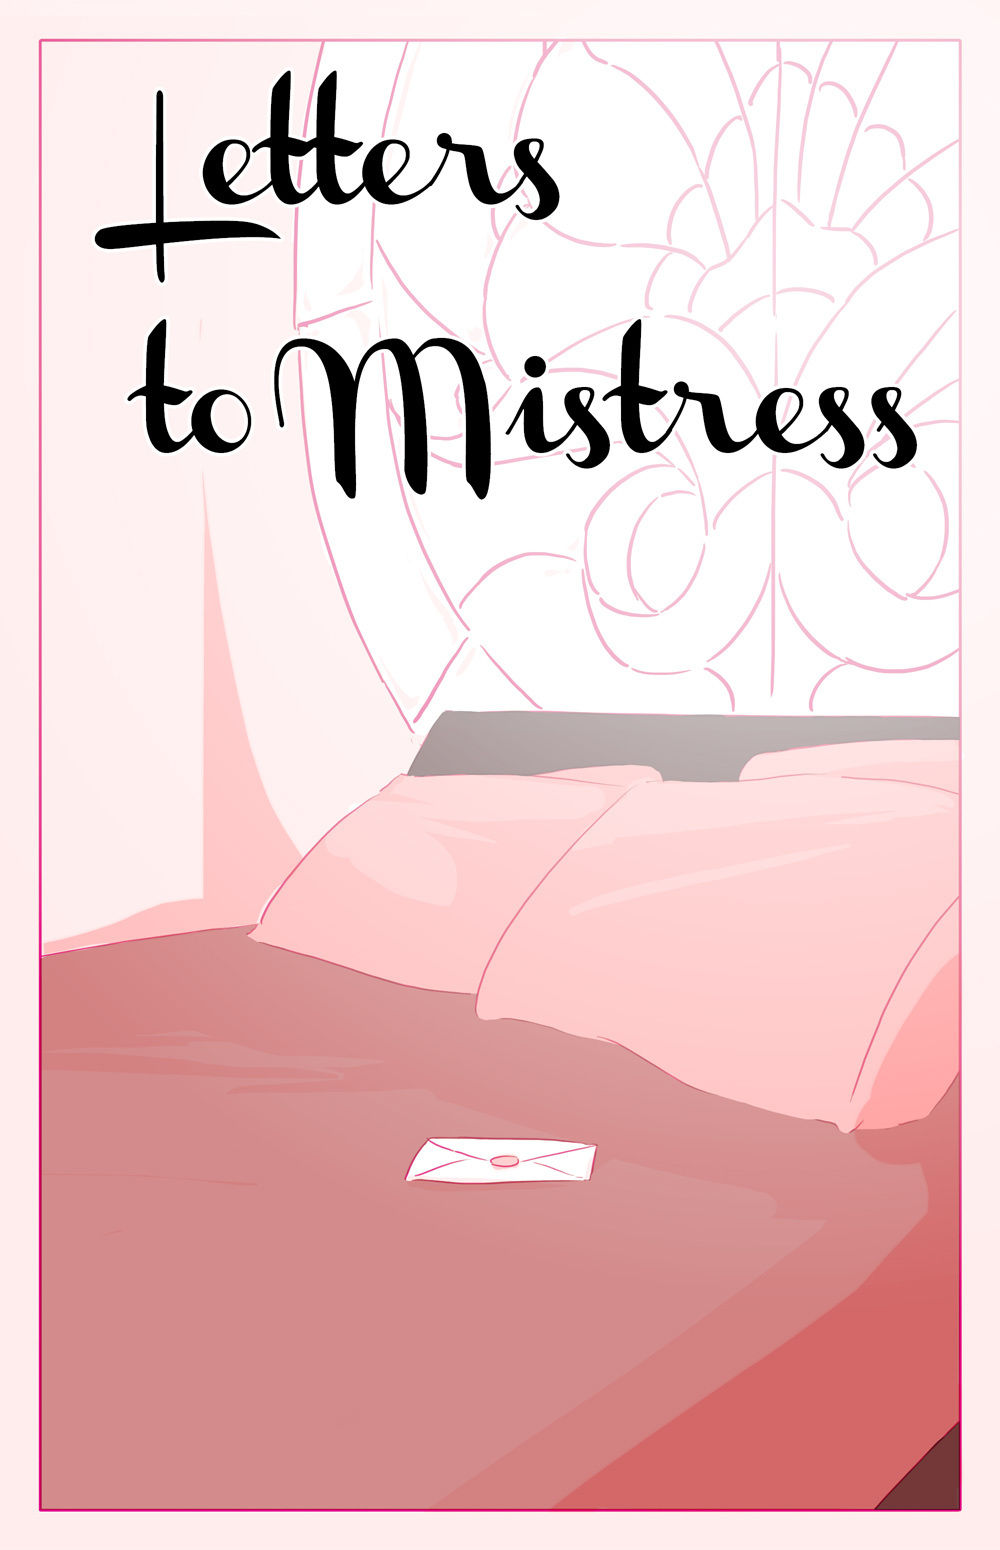 Letters to Mistress